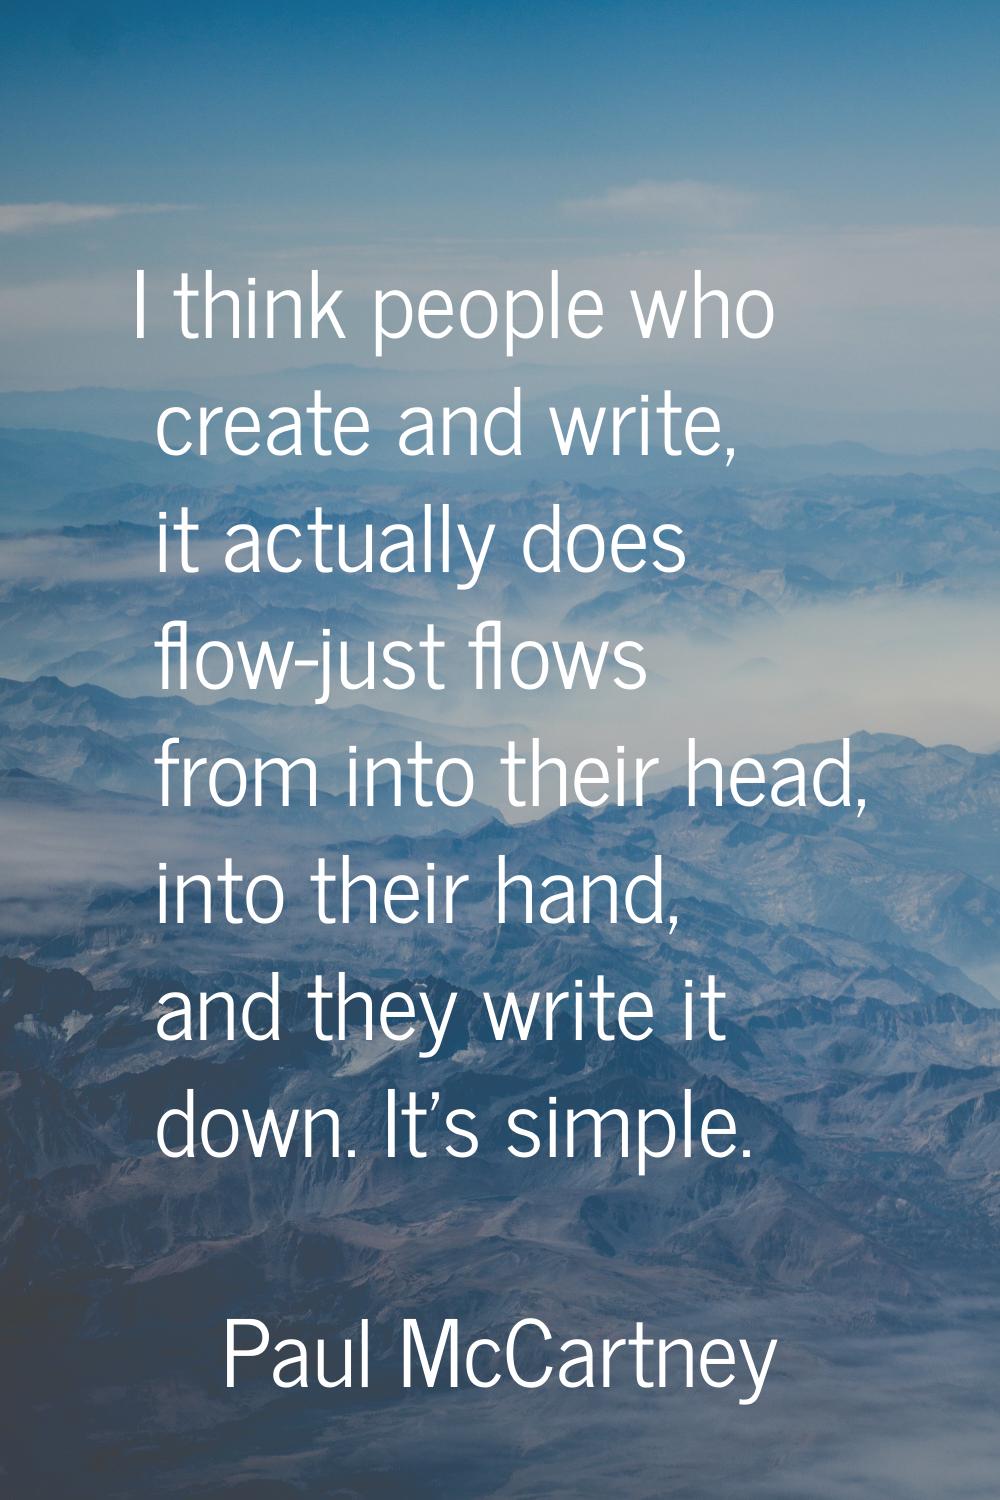 I think people who create and write, it actually does flow-just flows from into their head, into th